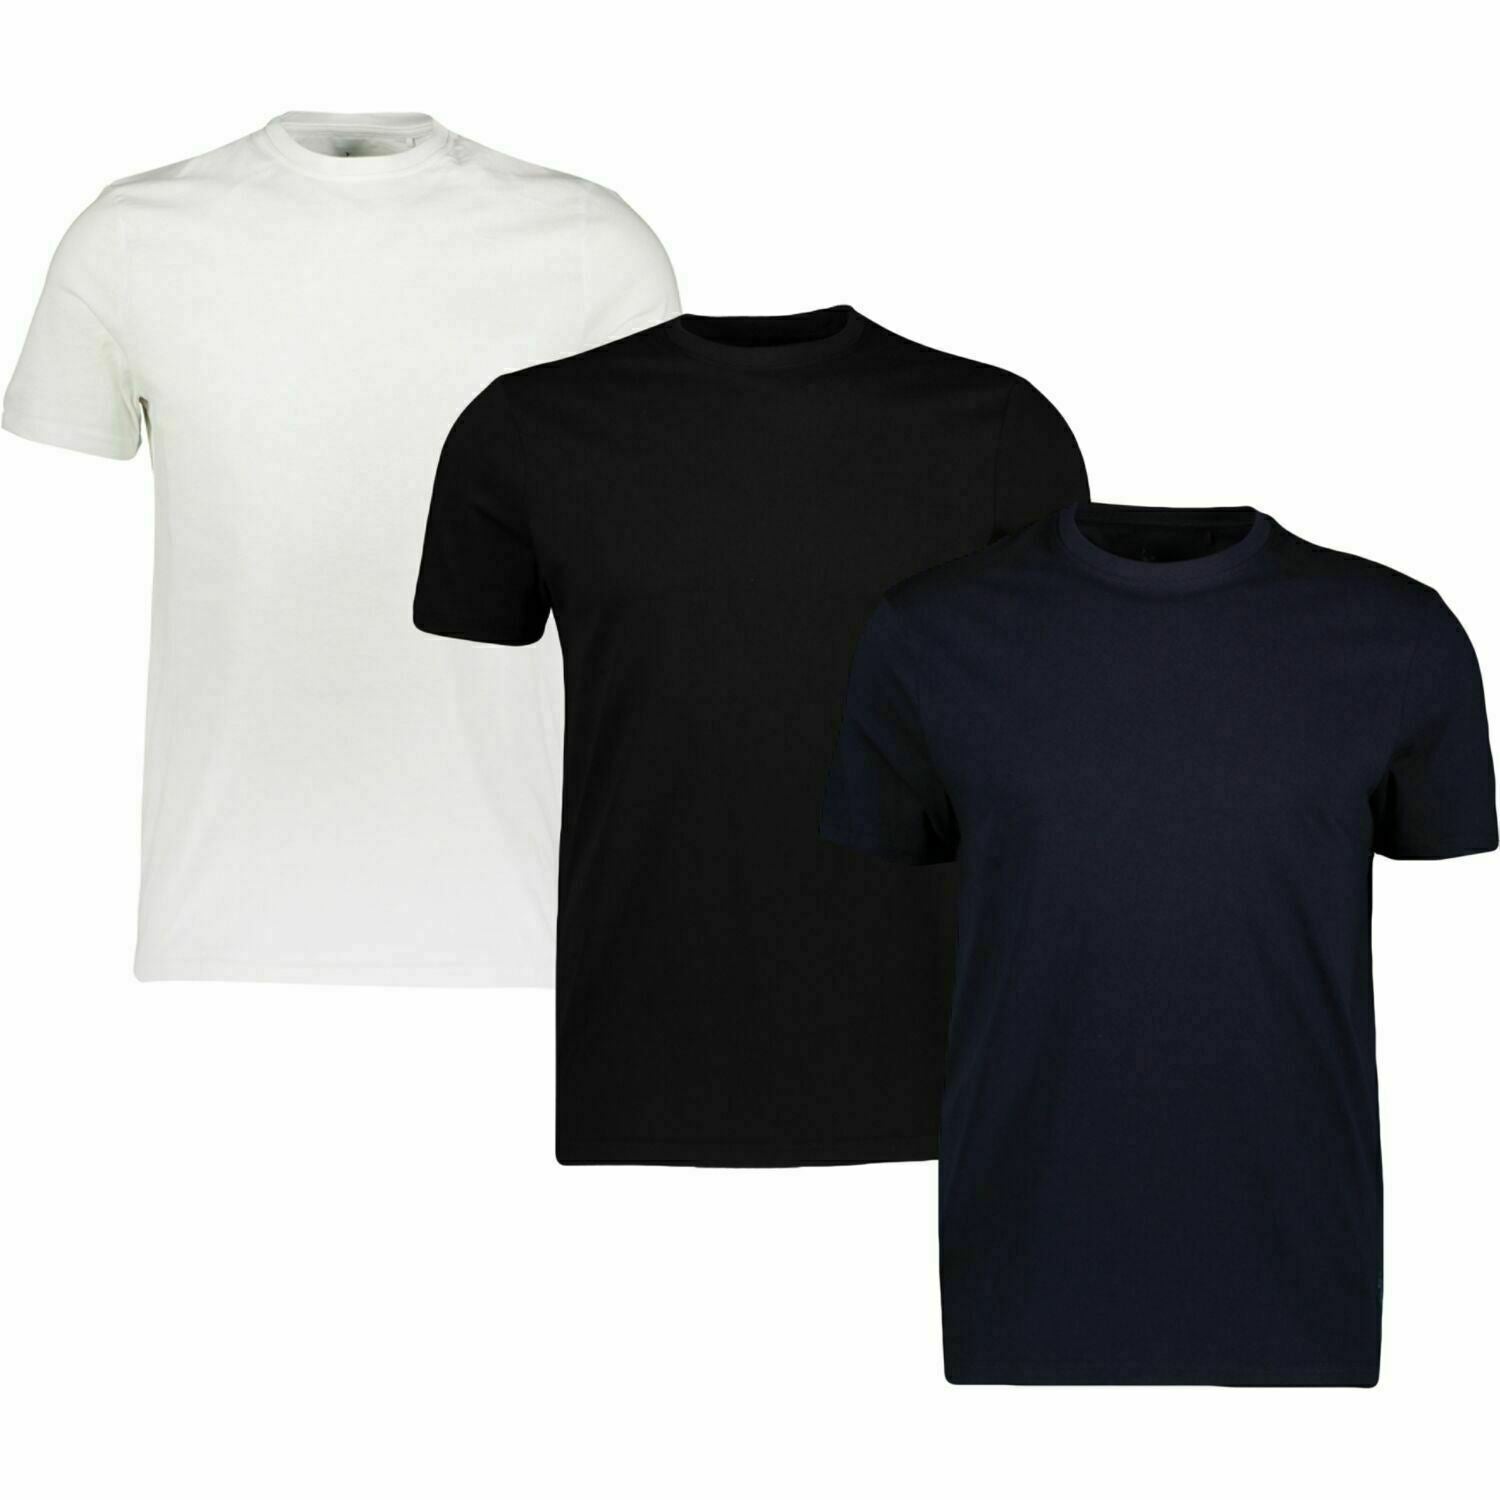 US POLO ASSN Men's 3-Pack Short Sleeve T-Shirts, White/Navy/Black, size M